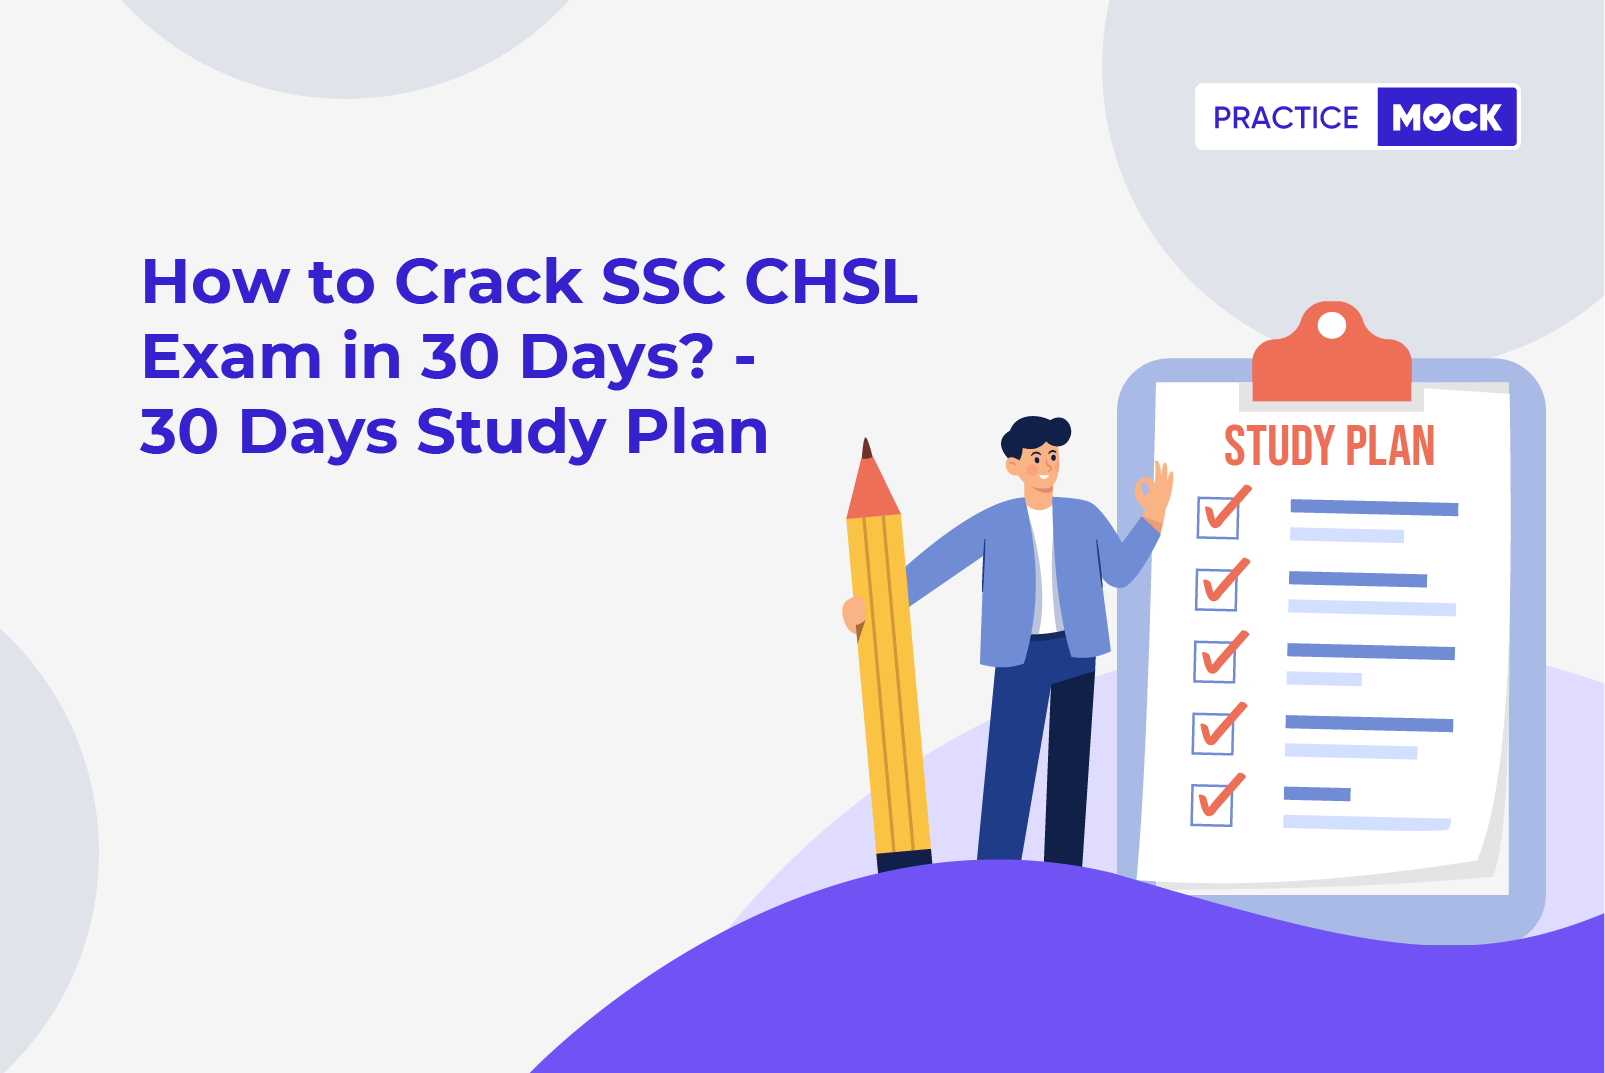 How to crack SSC CHSL Exam in 30 Days-Check out 30-Day Study Plan for Success!